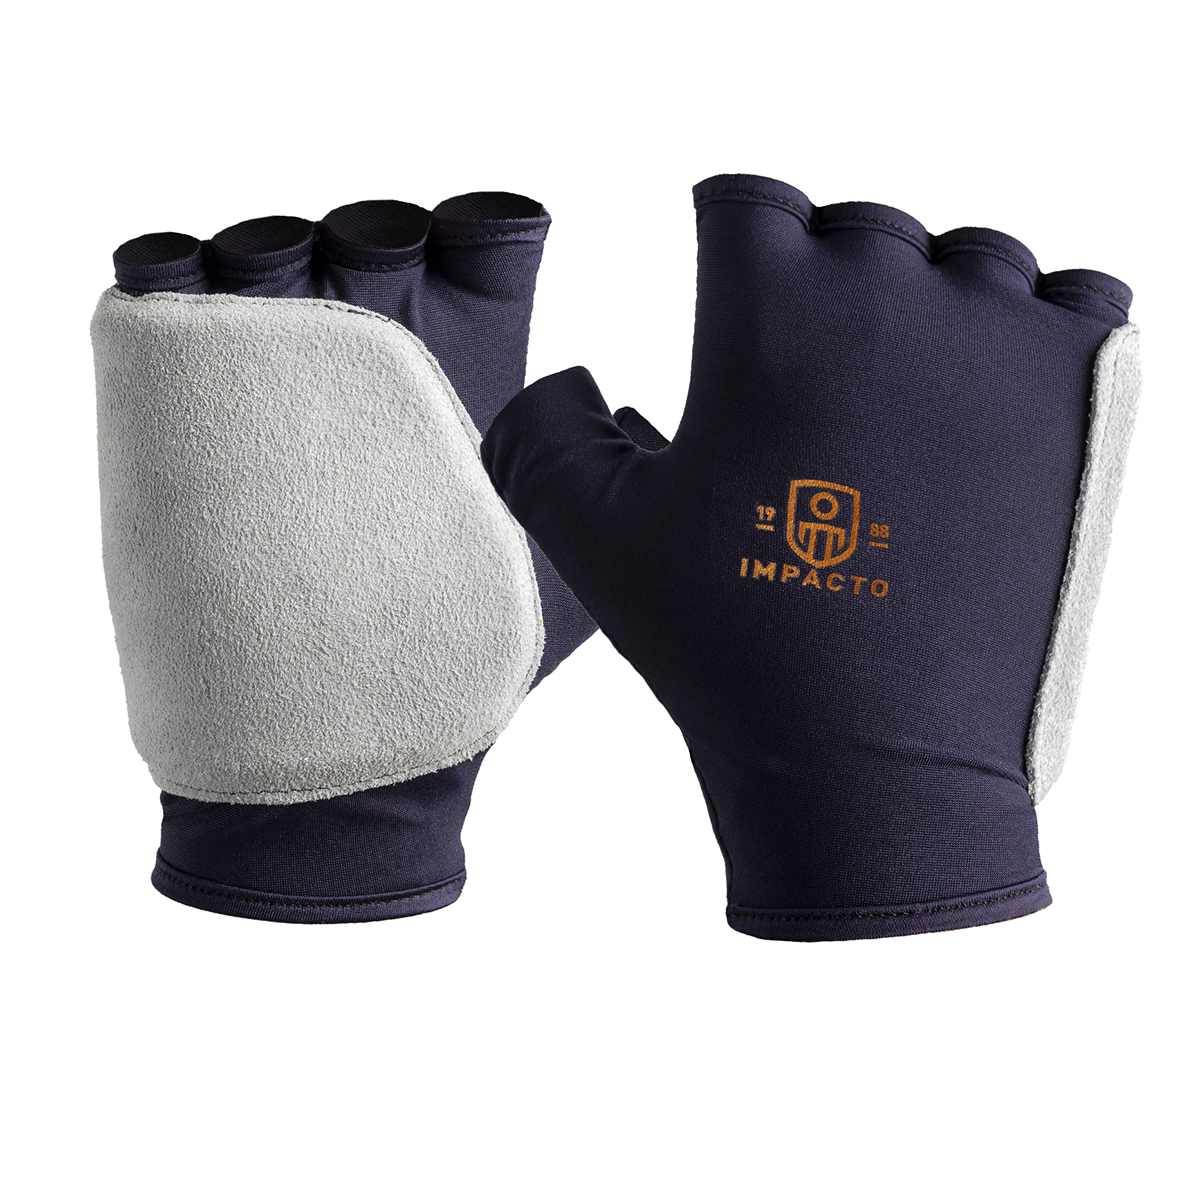 IMPACTO 523-14MLH GLOVE IMPACT 1/4 SUEDE SIDE